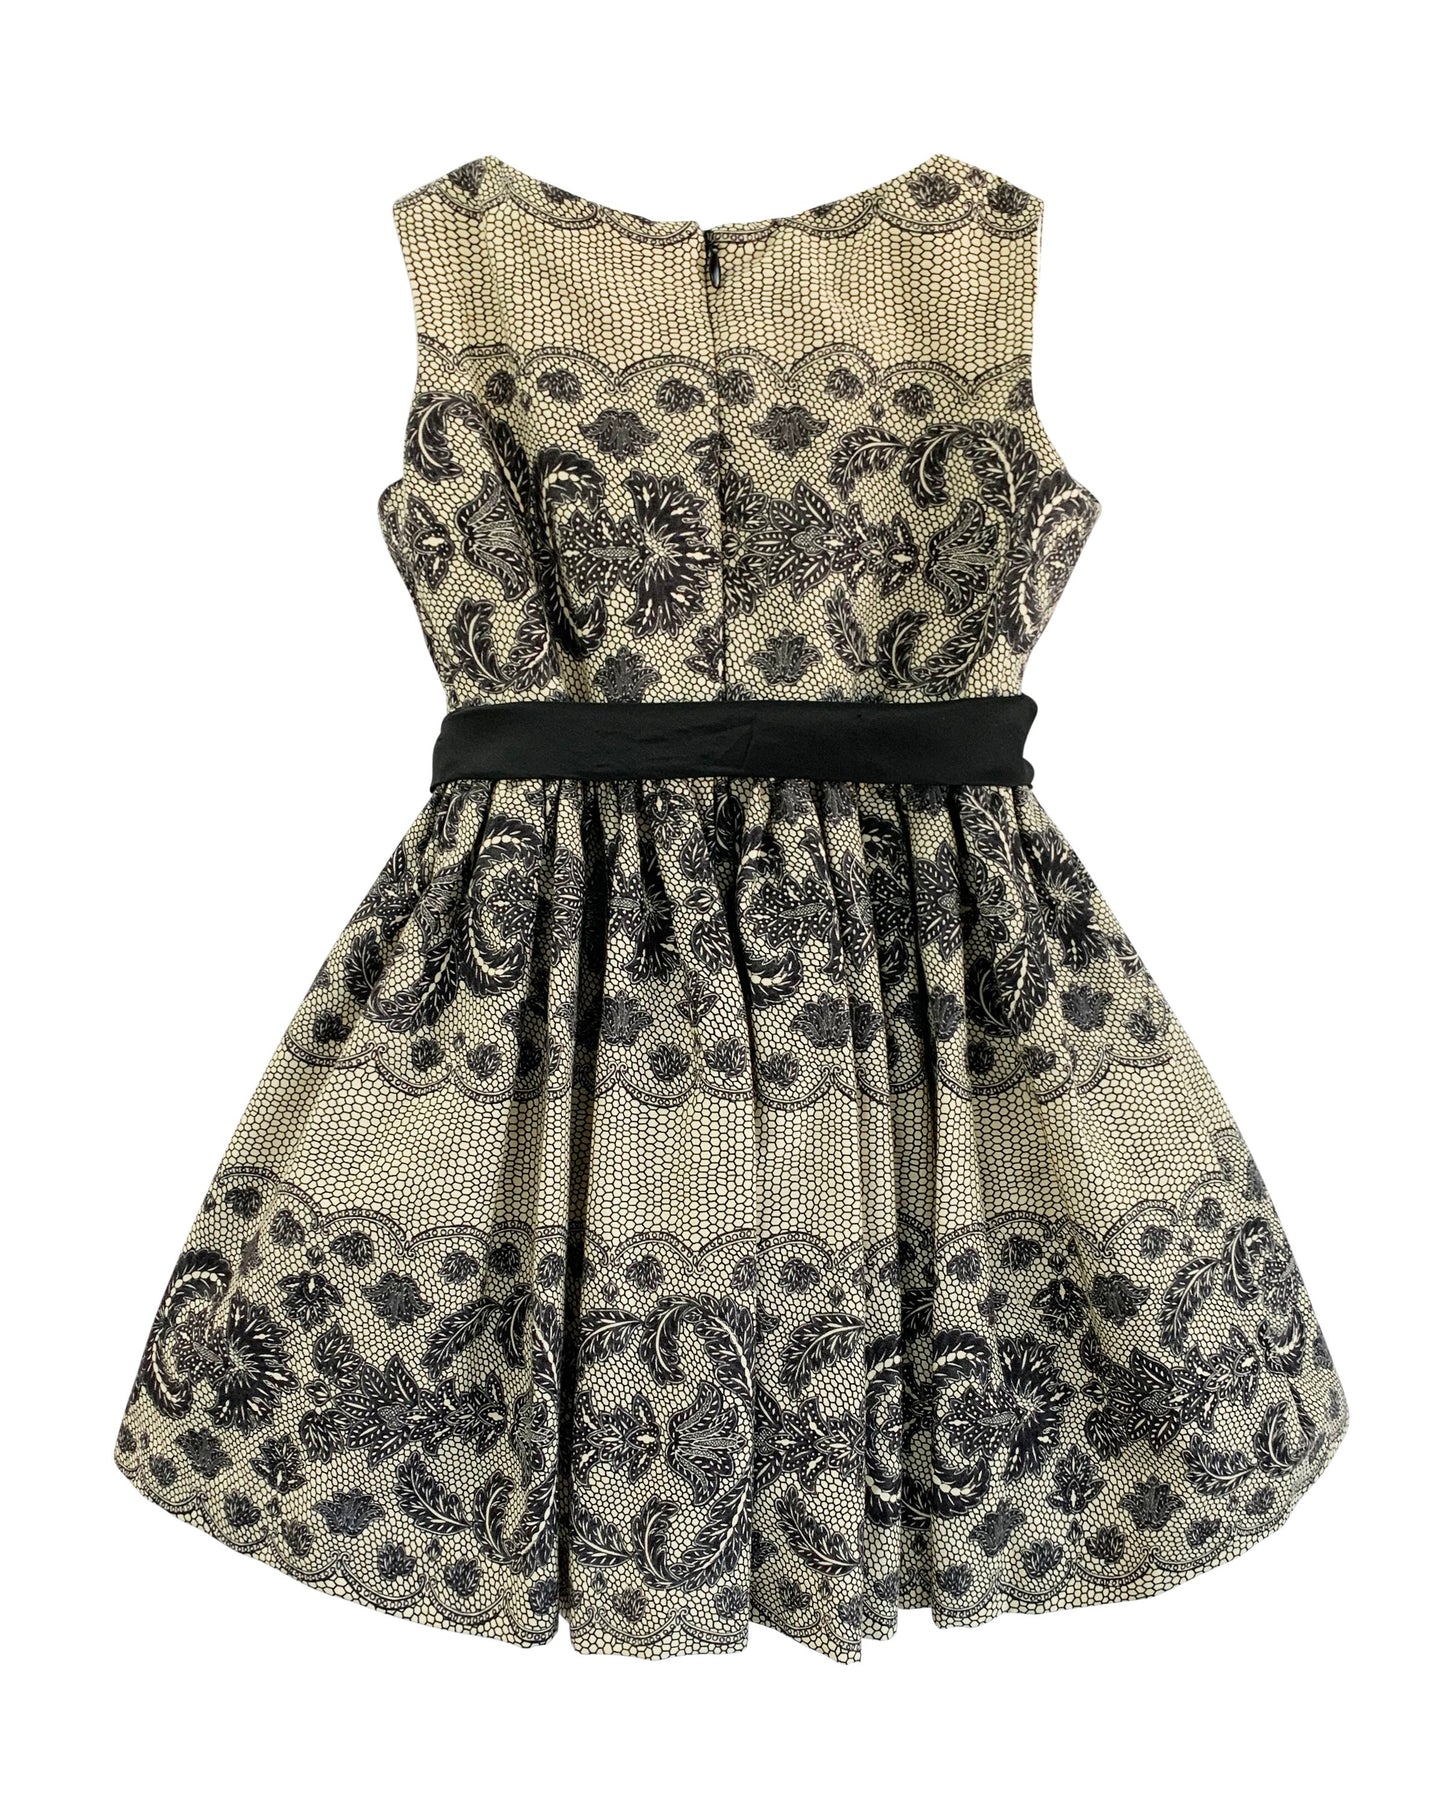 Helena and Harry Girl's Camel Colored Cotton with Black Lace Print Dress